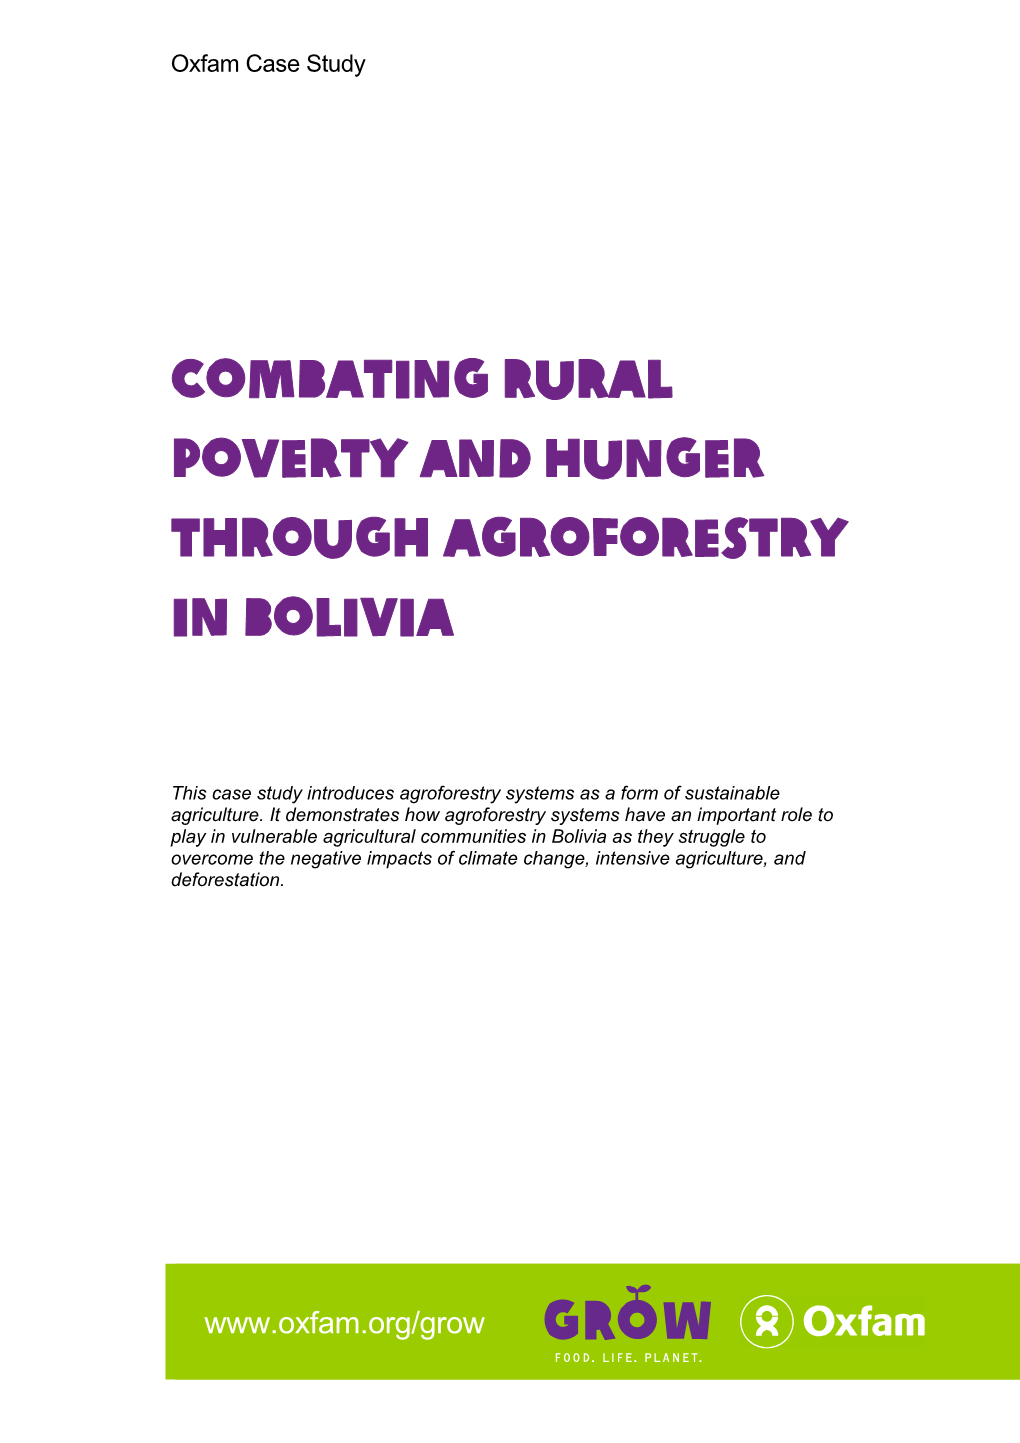 Combating Rural Poverty and Hunger Through Agroforestry in Bolivia